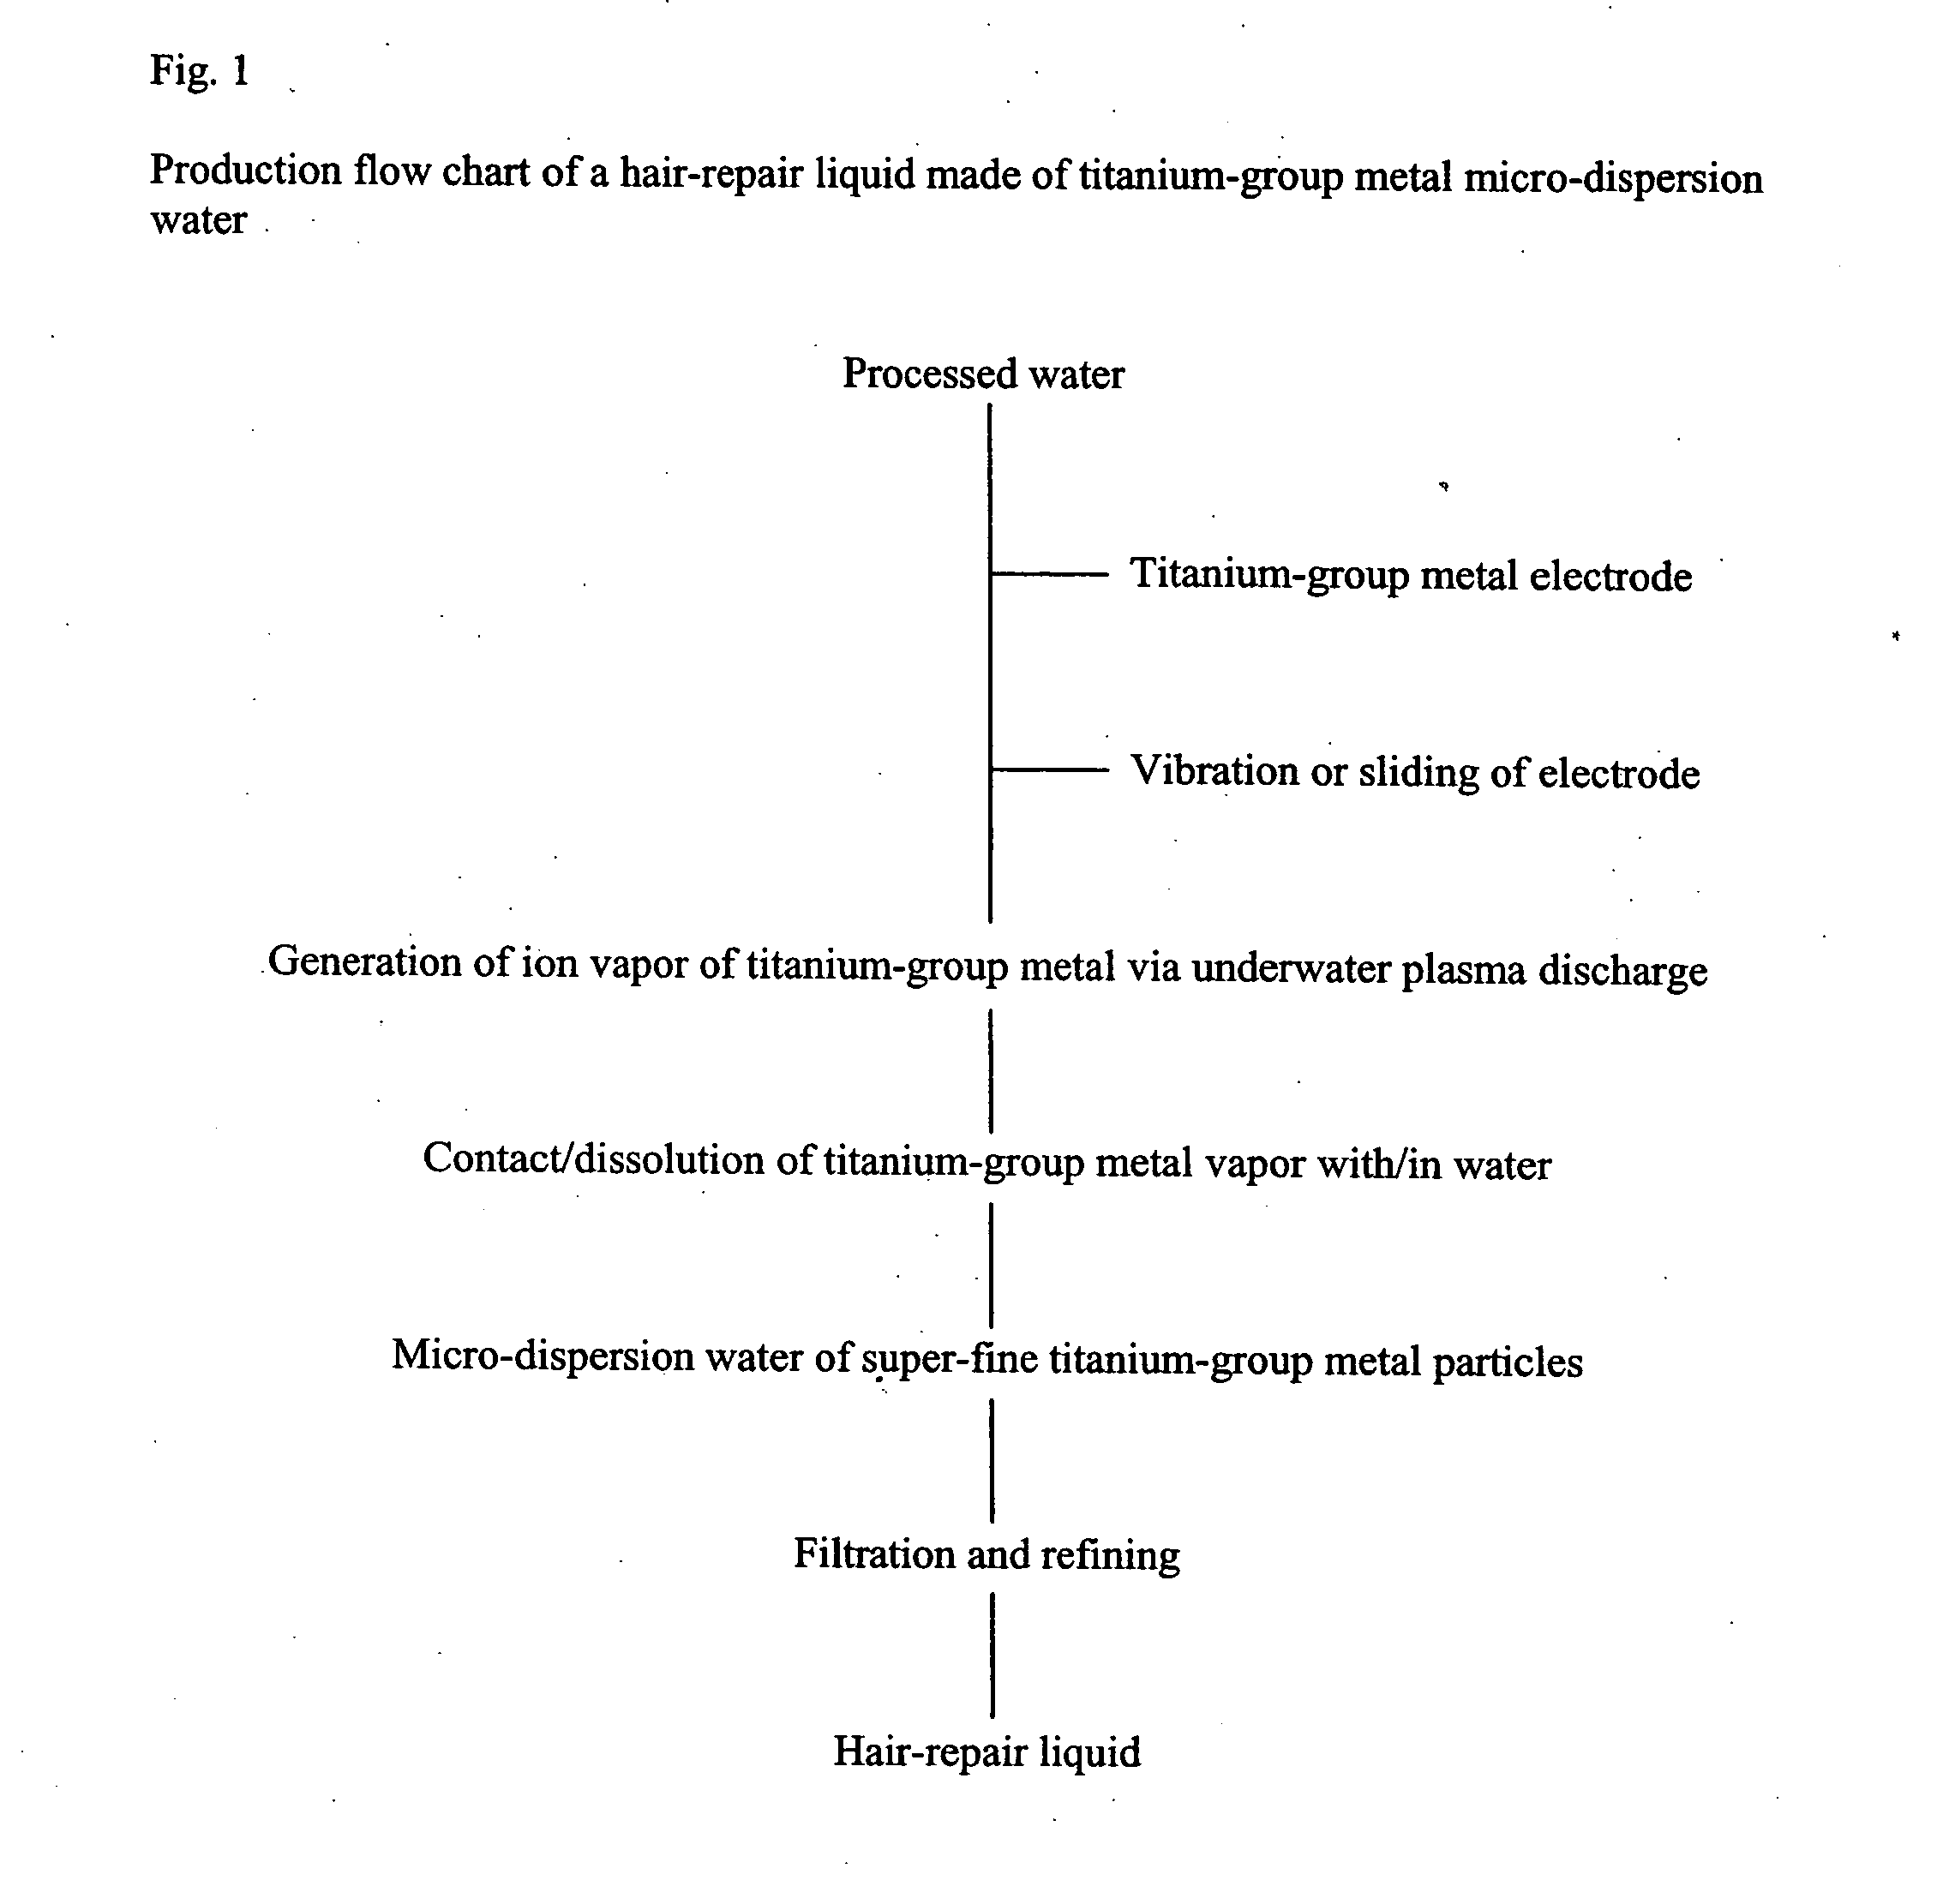 Hair repairing liquid comprising water dispersed with ultrafine particle titanium group metal by plasma underwater discharge and method and system for producing the same